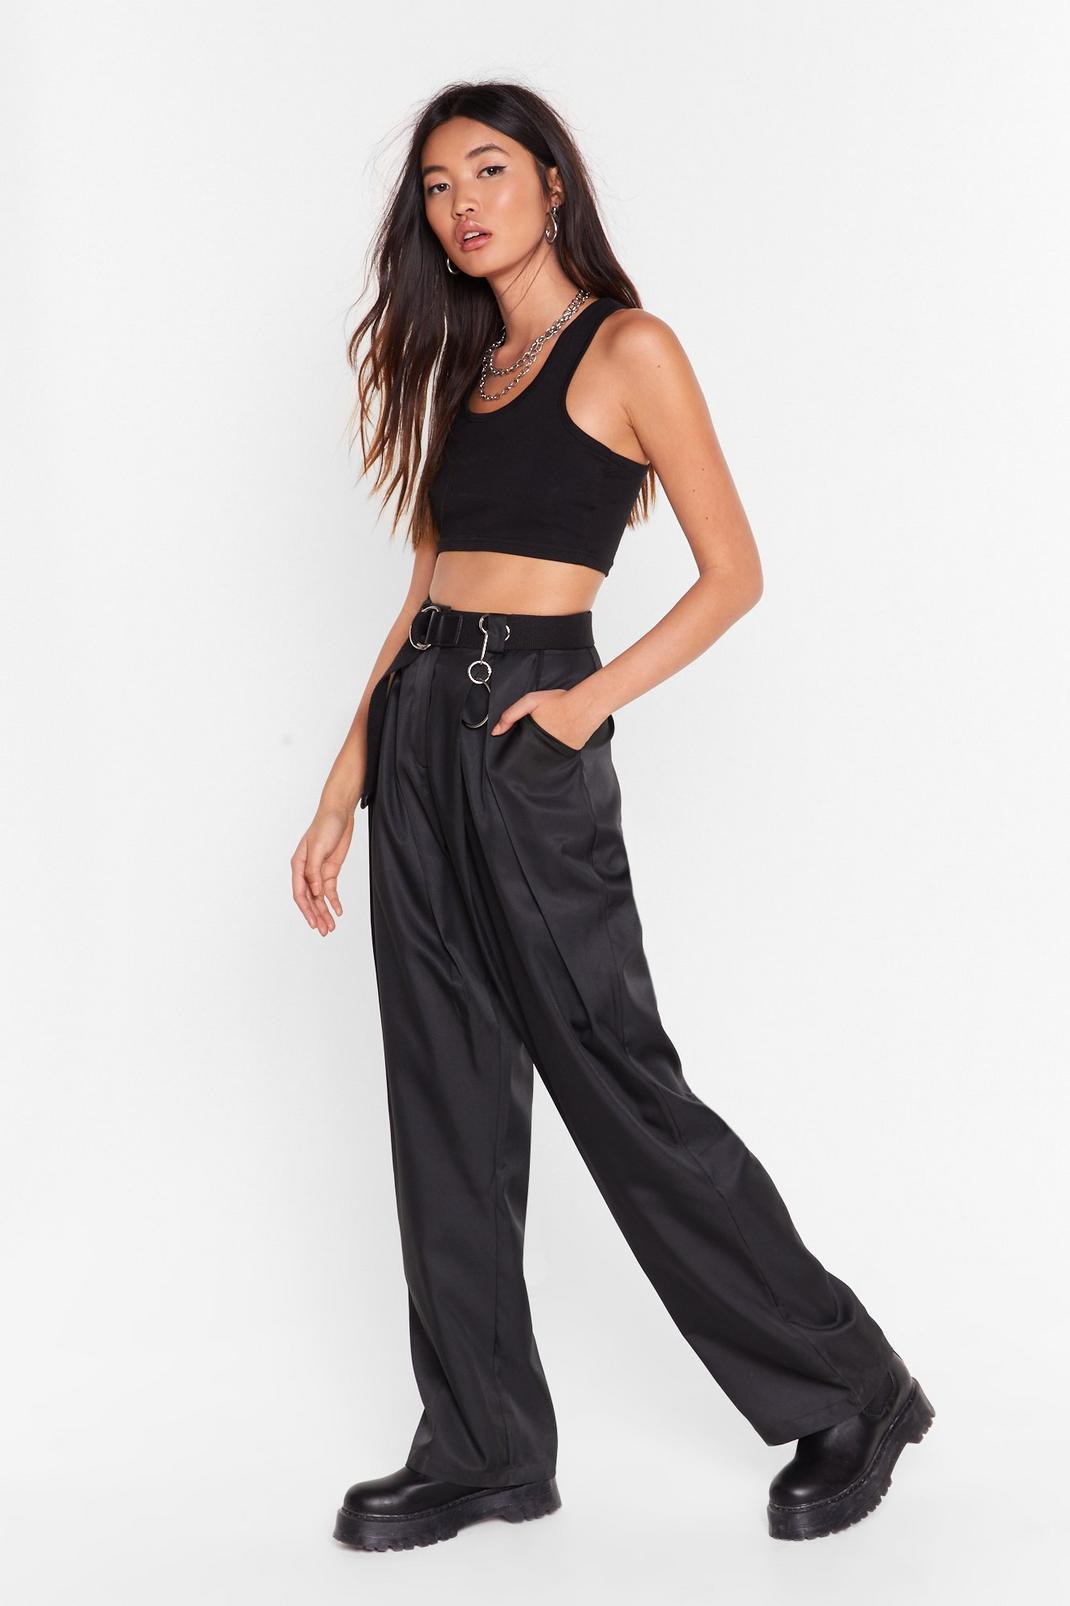 Pleat Things Up High-Waisted Pants image number 1